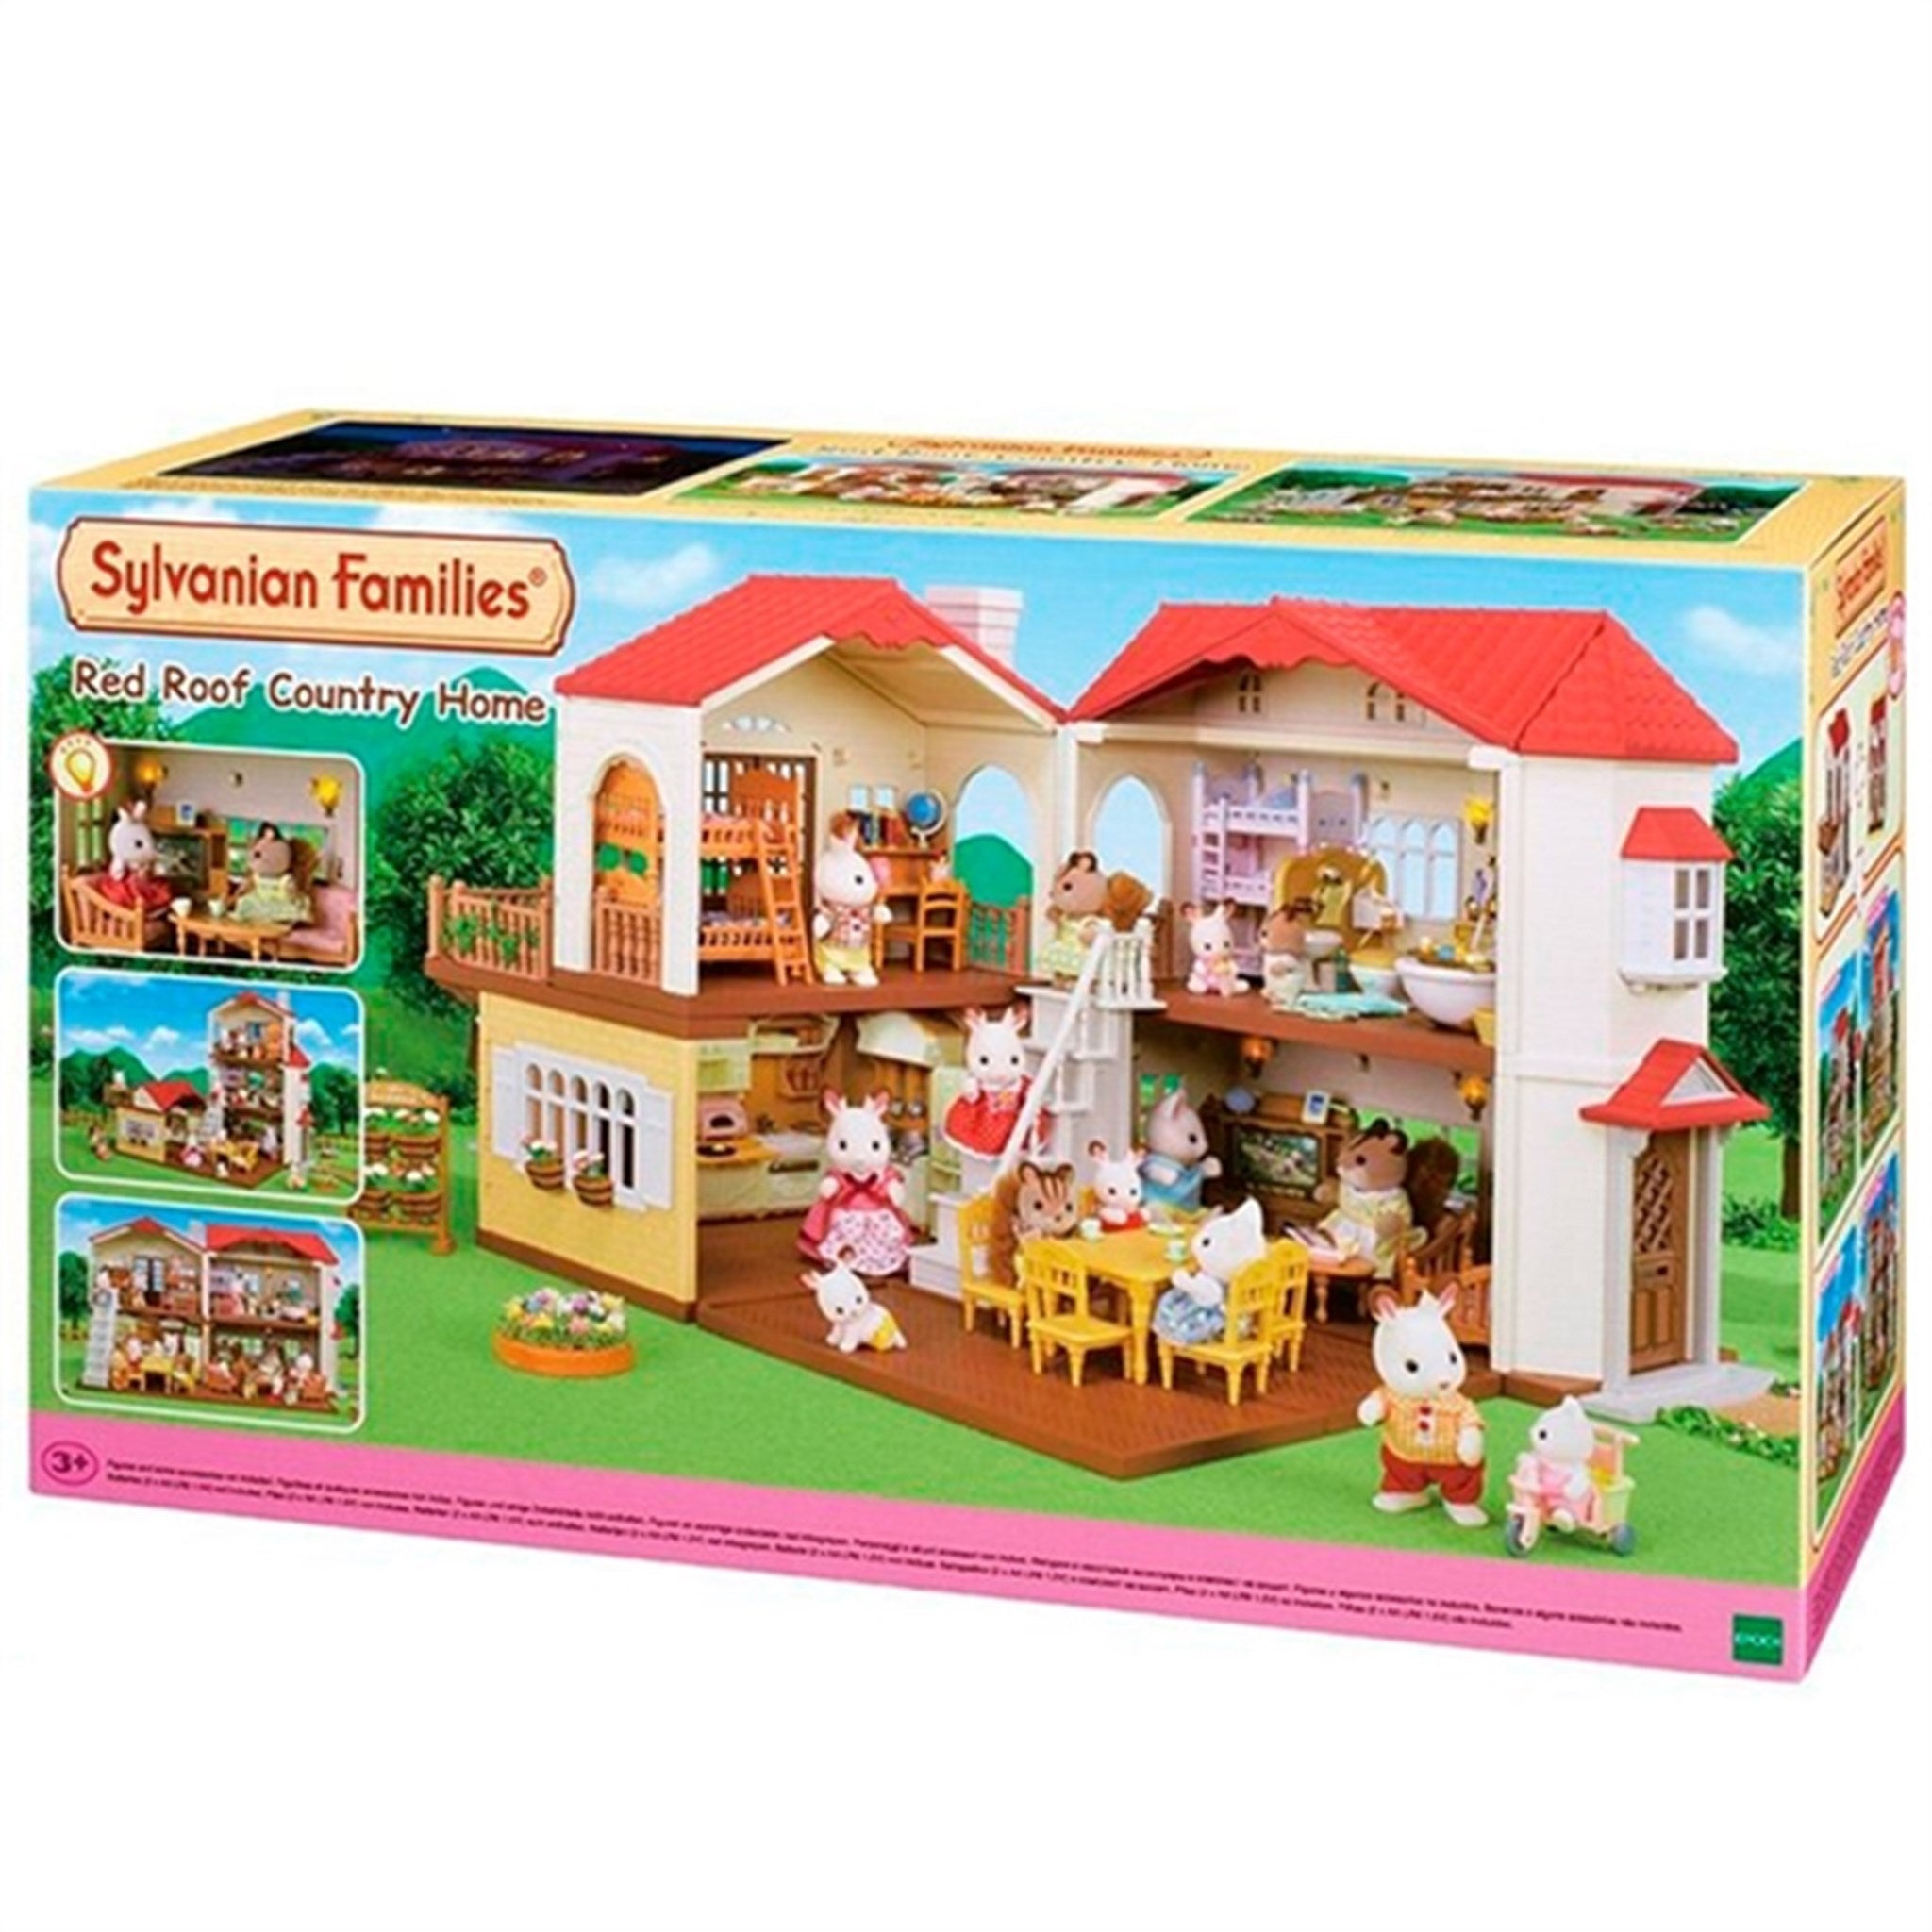 Sylvanian Families® Red Roof Country Home